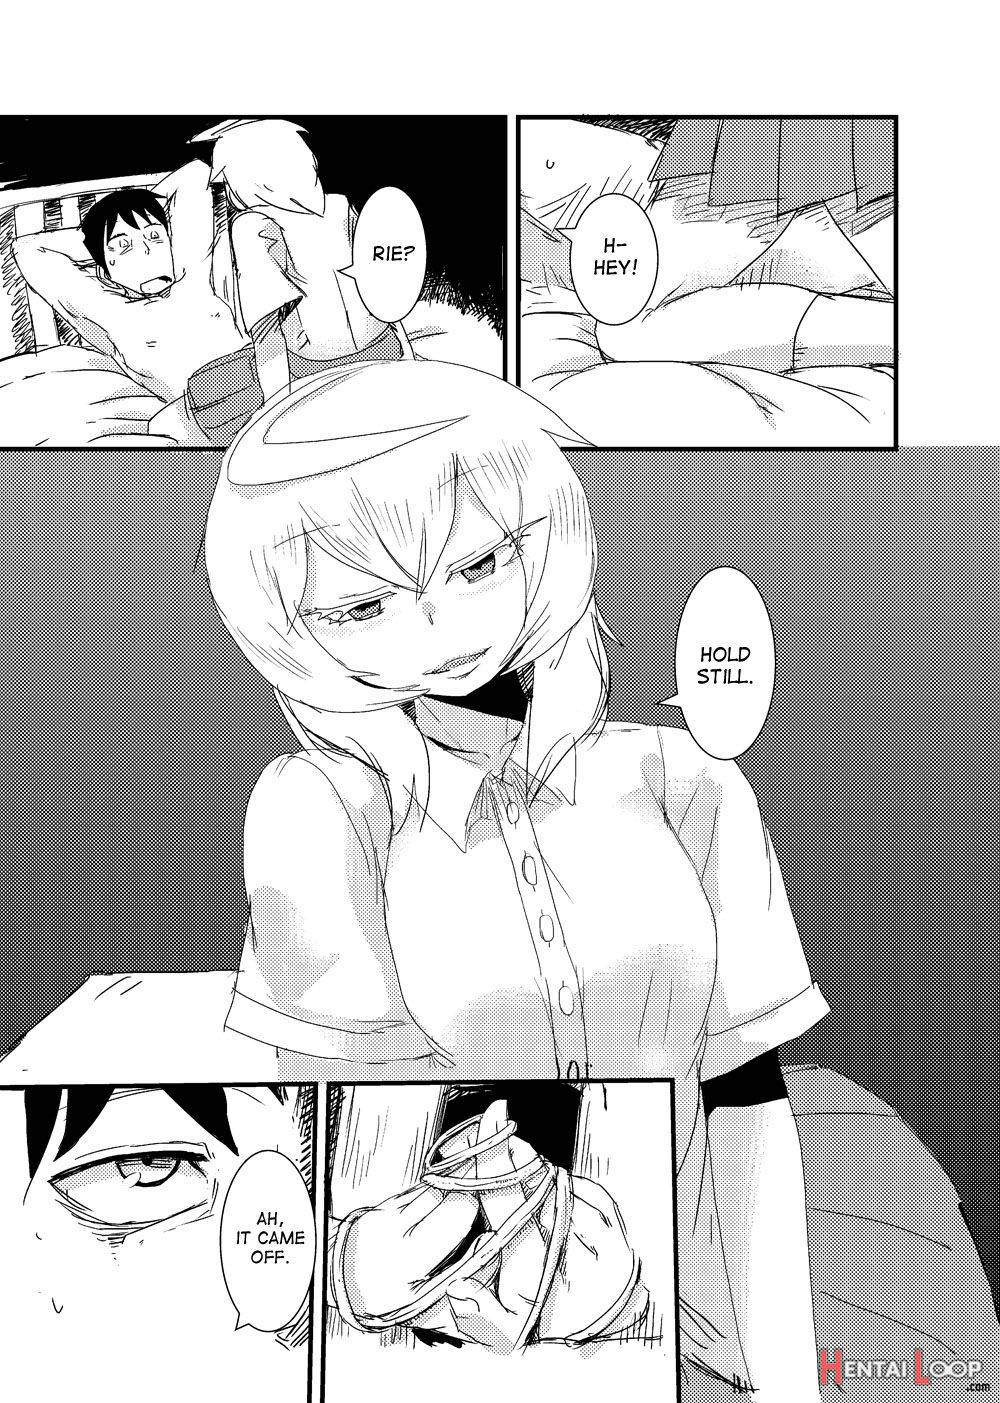 Kanojo No Henshin – Attack Of The Monster Girl page 12